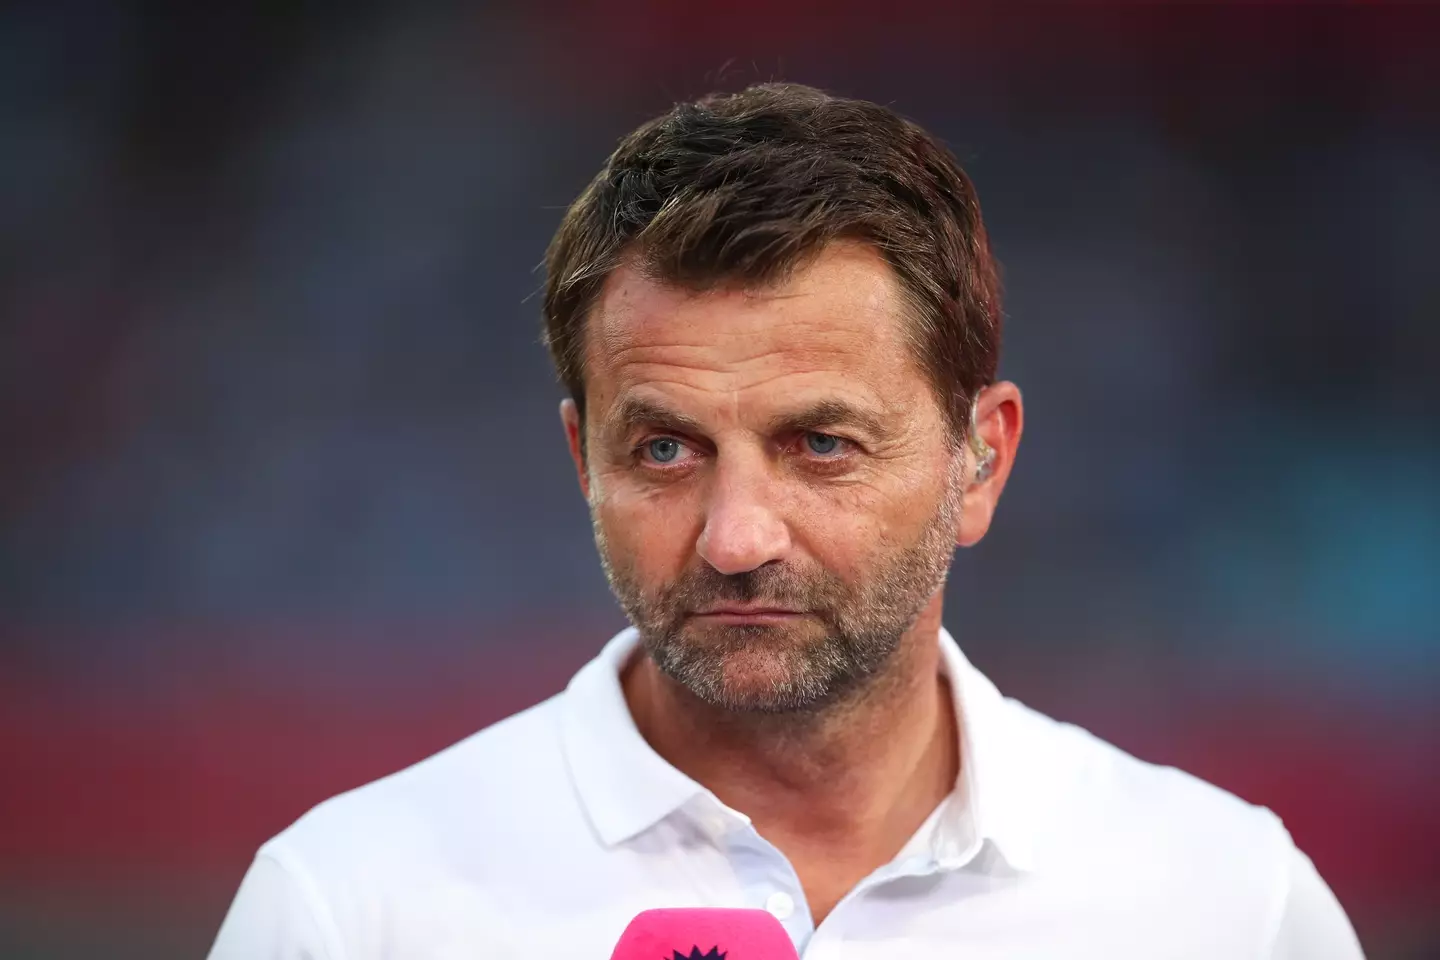 Tim Sherwood has divided fans with his comments on Erik ten Hag.